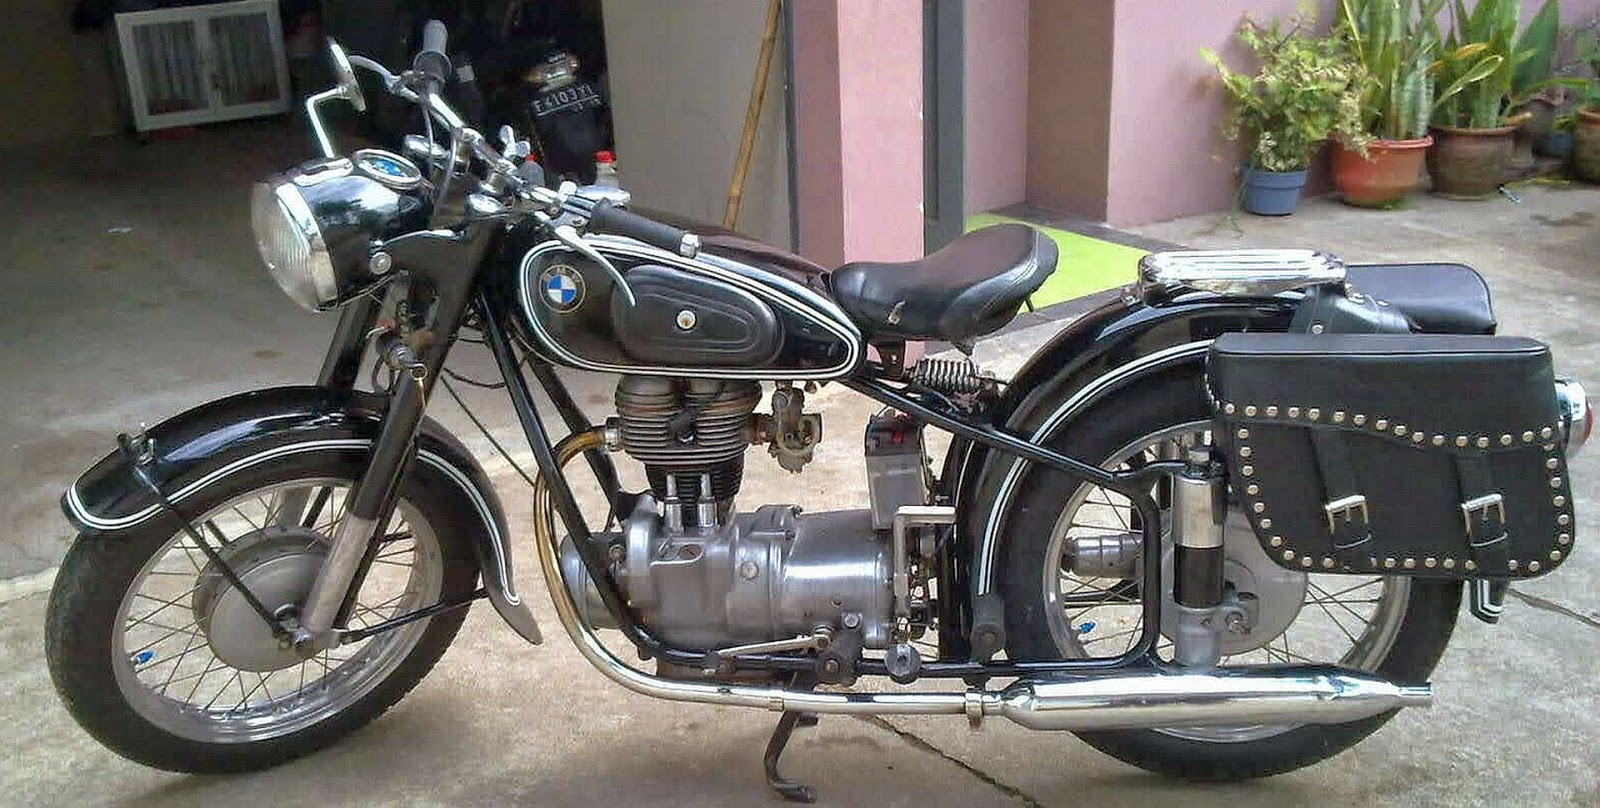 BMW Antique Motorcycle | OldsMotorcycles